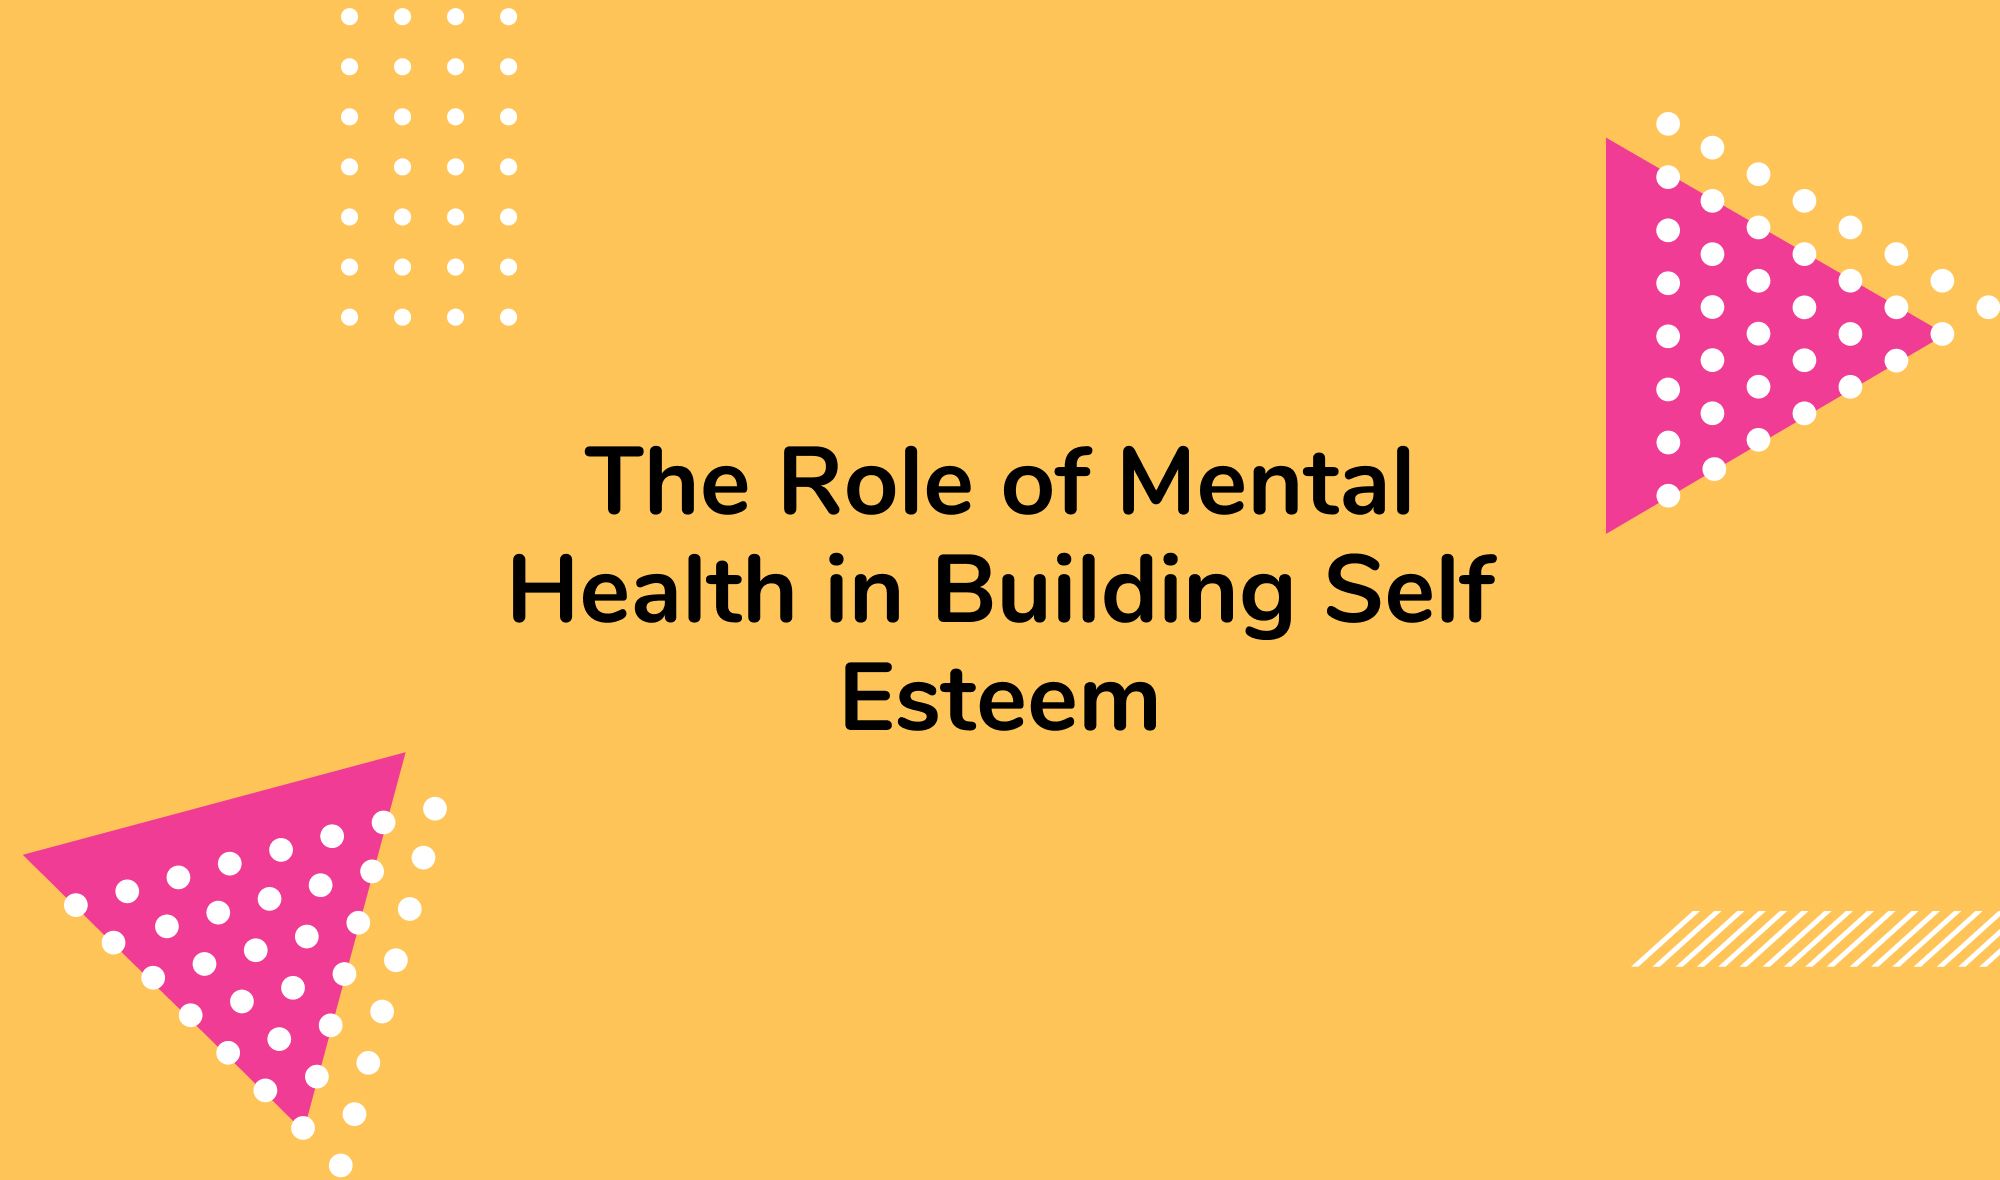 The Role of Mental Health in Building Self Esteem